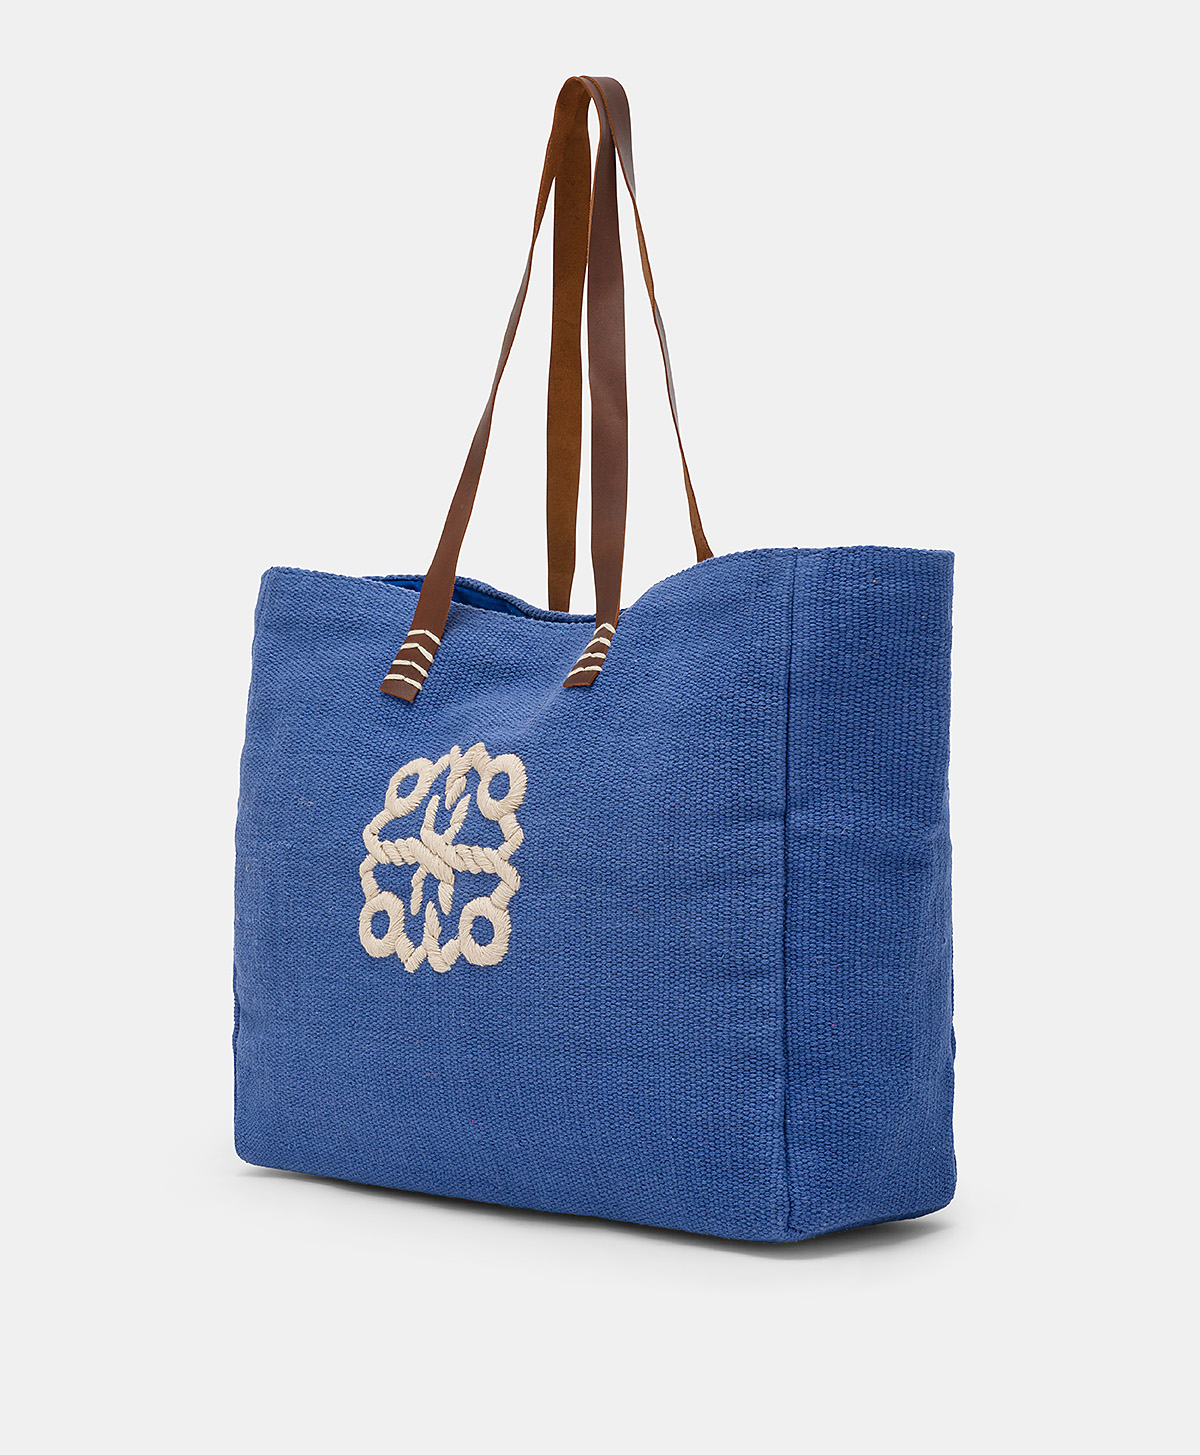 PARAGUAN BAG IN EMBROIDERED CANVAS - BLUE - Momonì